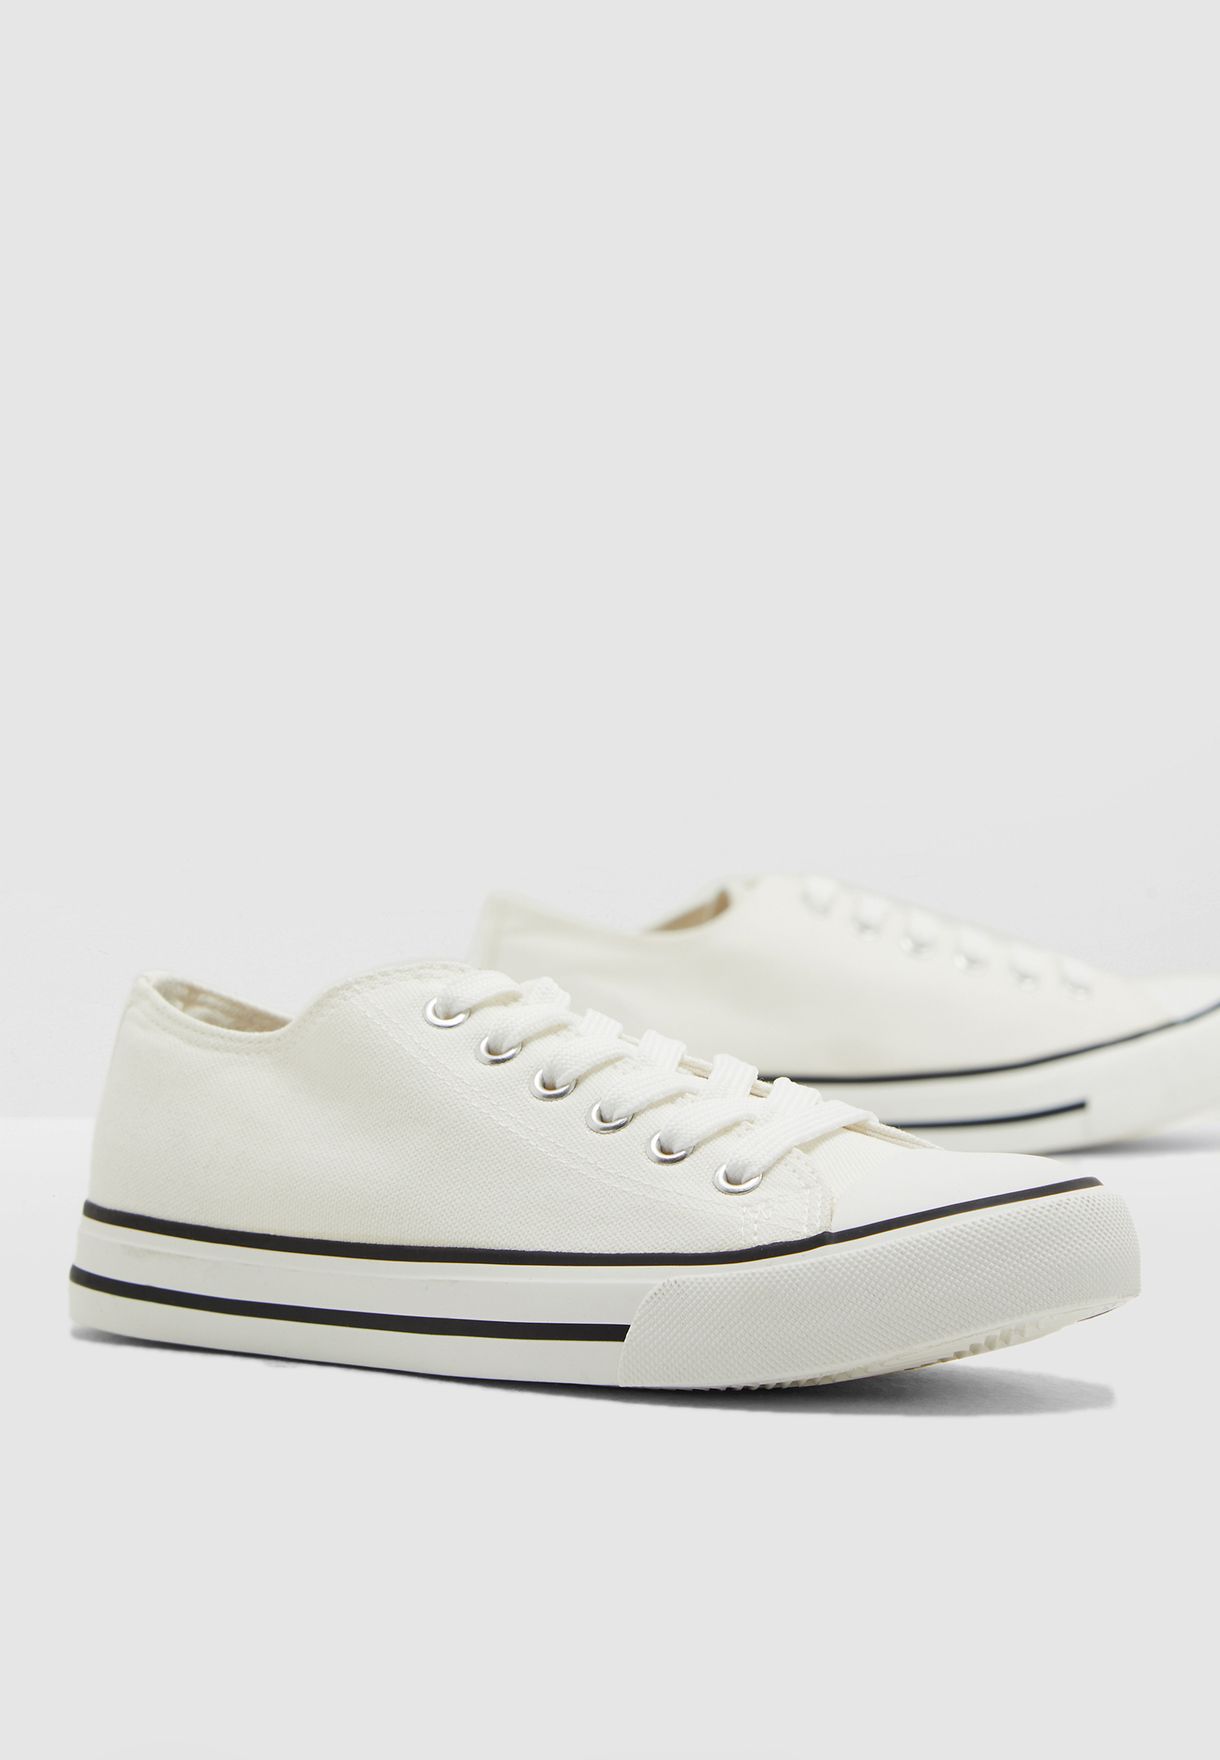 dorothy perkins white shoes